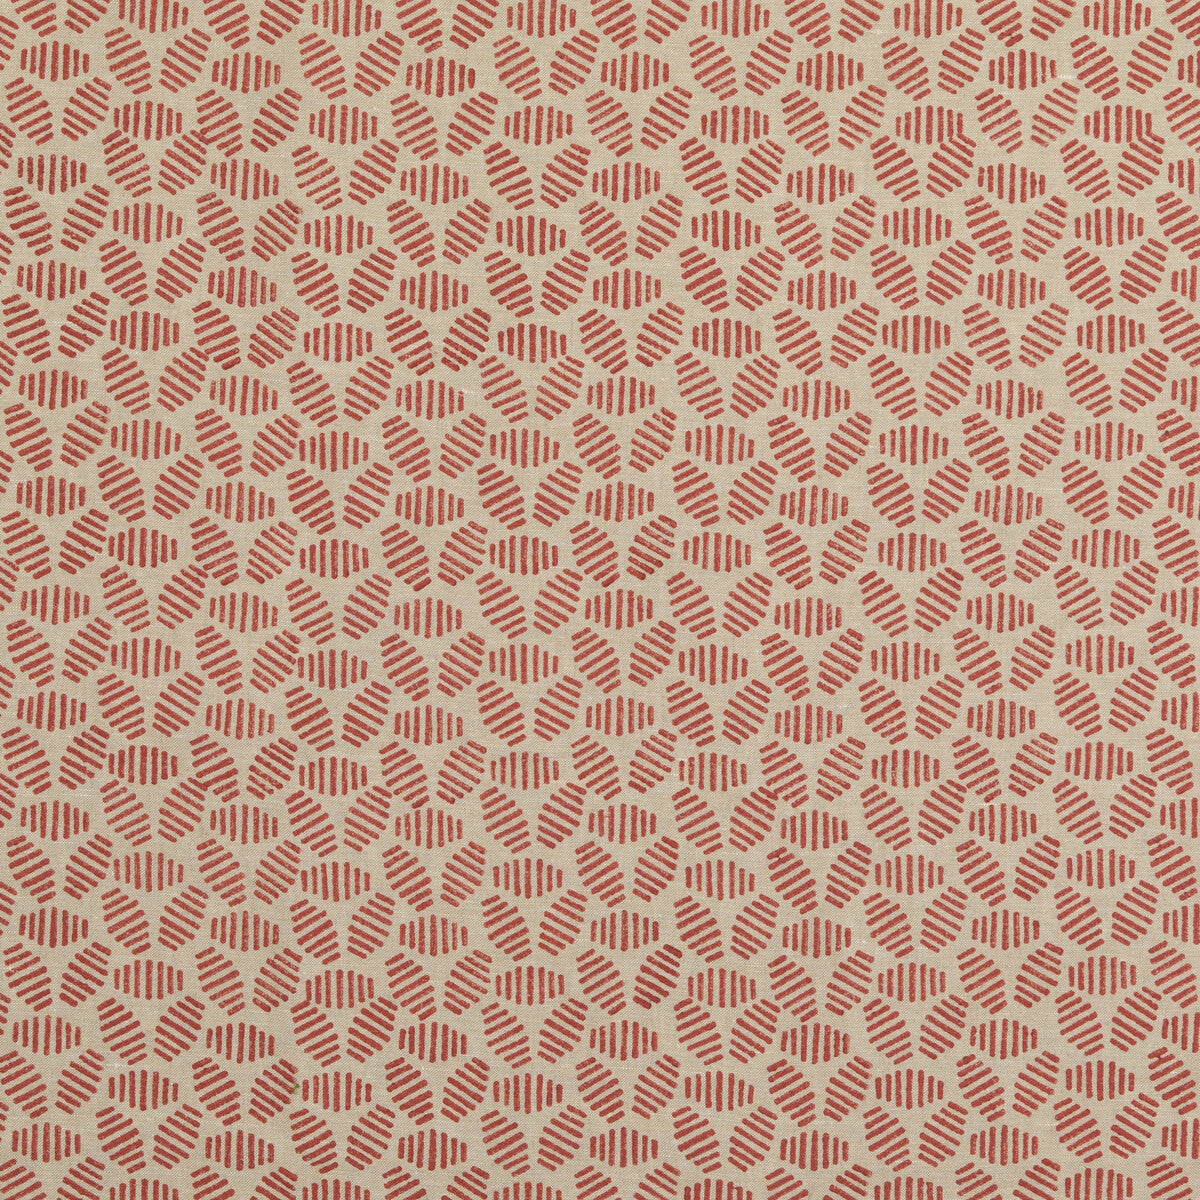 Bumble Bee fabric in rustic red color - pattern PP50482.2.0 - by Baker Lifestyle in the Block Party collection